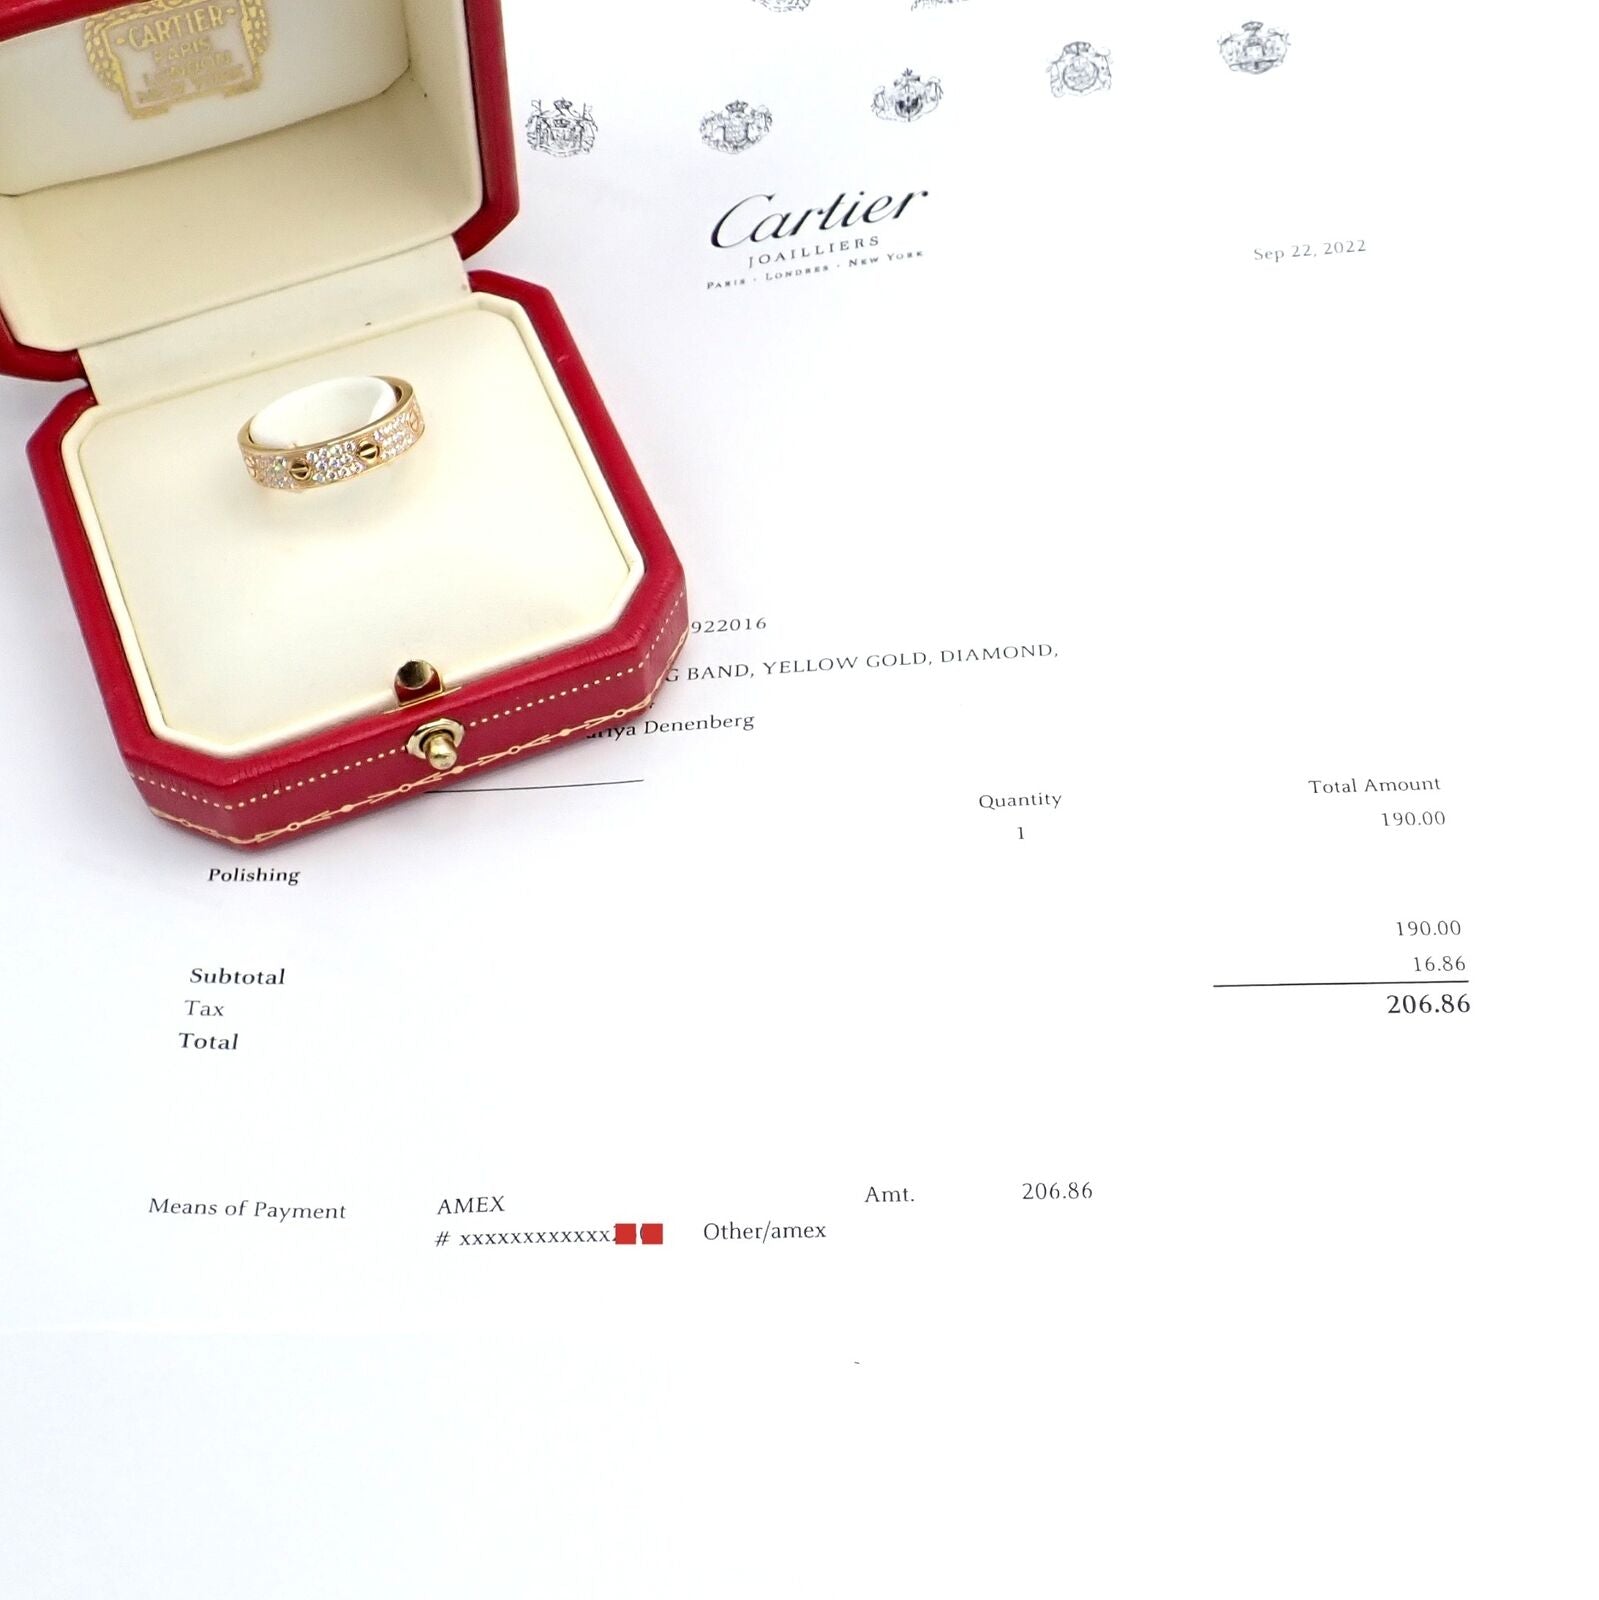 Cartier Jewelry & Watches:Fine Jewelry:Rings Authentic! Cartier Love 18k Yellow Gold Diamond Paved Ring sz 7.25 55